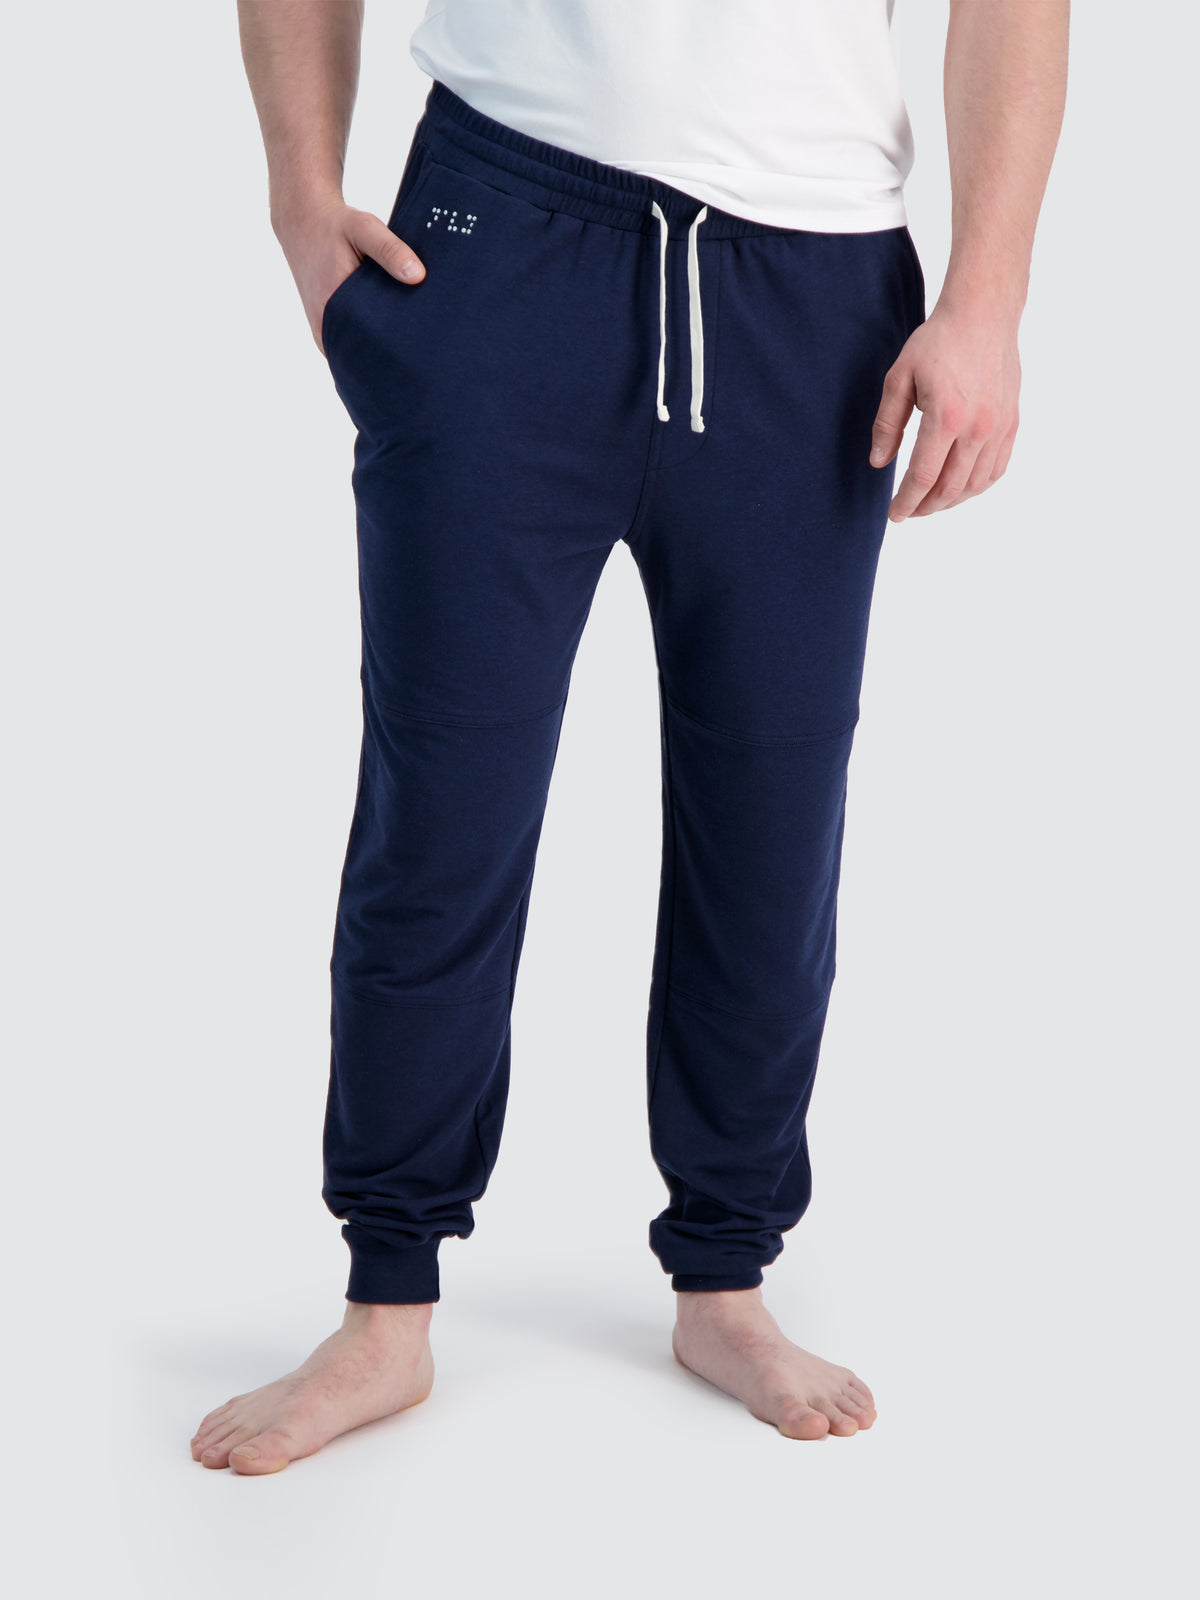 Two Blind Brothers - Mens Men's French Terry Jogger Navy